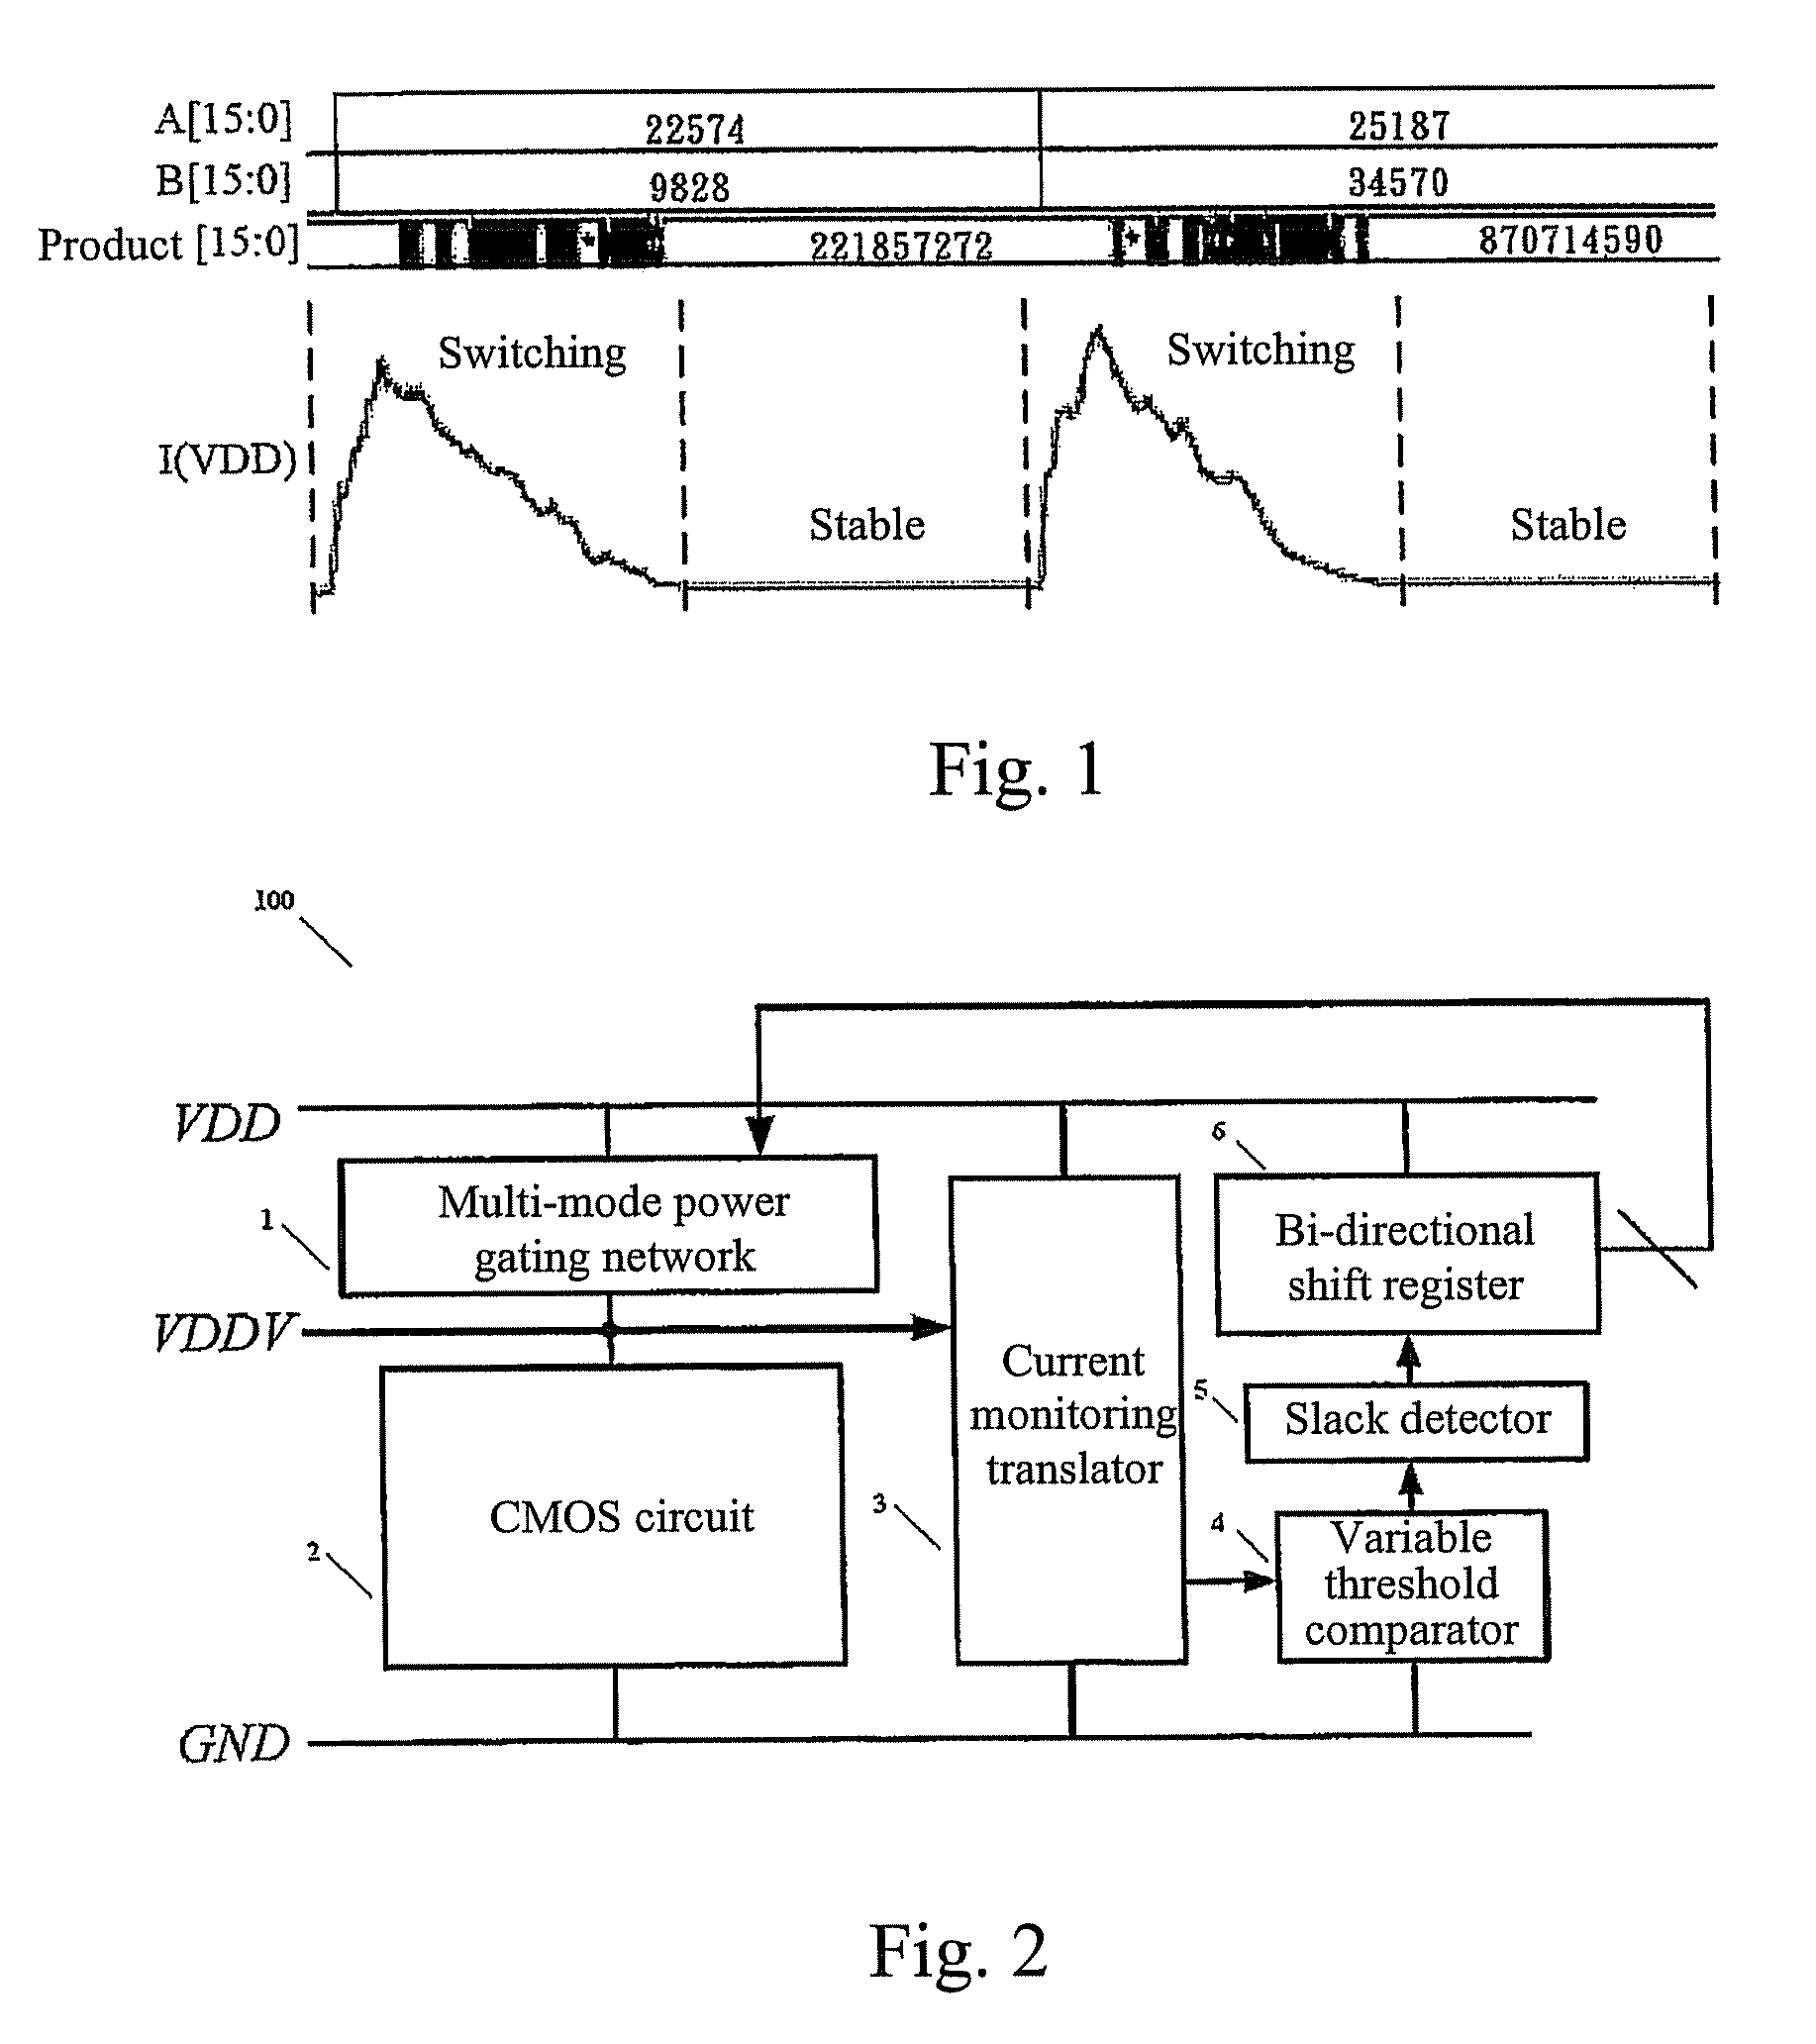 Self-aware adaptive power control system and a method for determining the circuit state